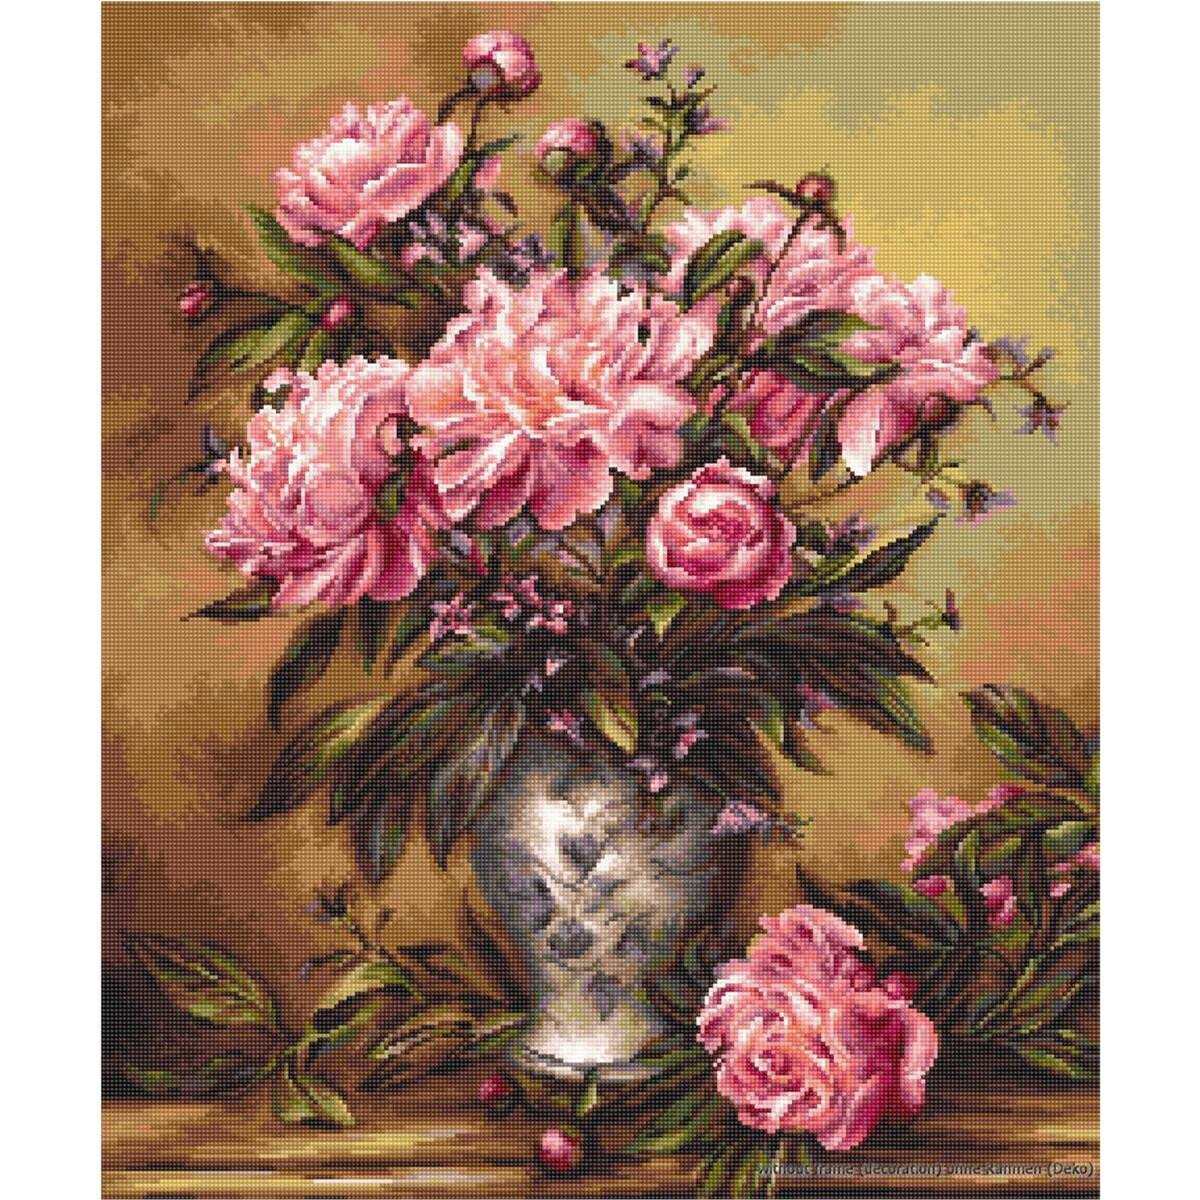 Luca-S counted Cross Stitch kit "Vase of...